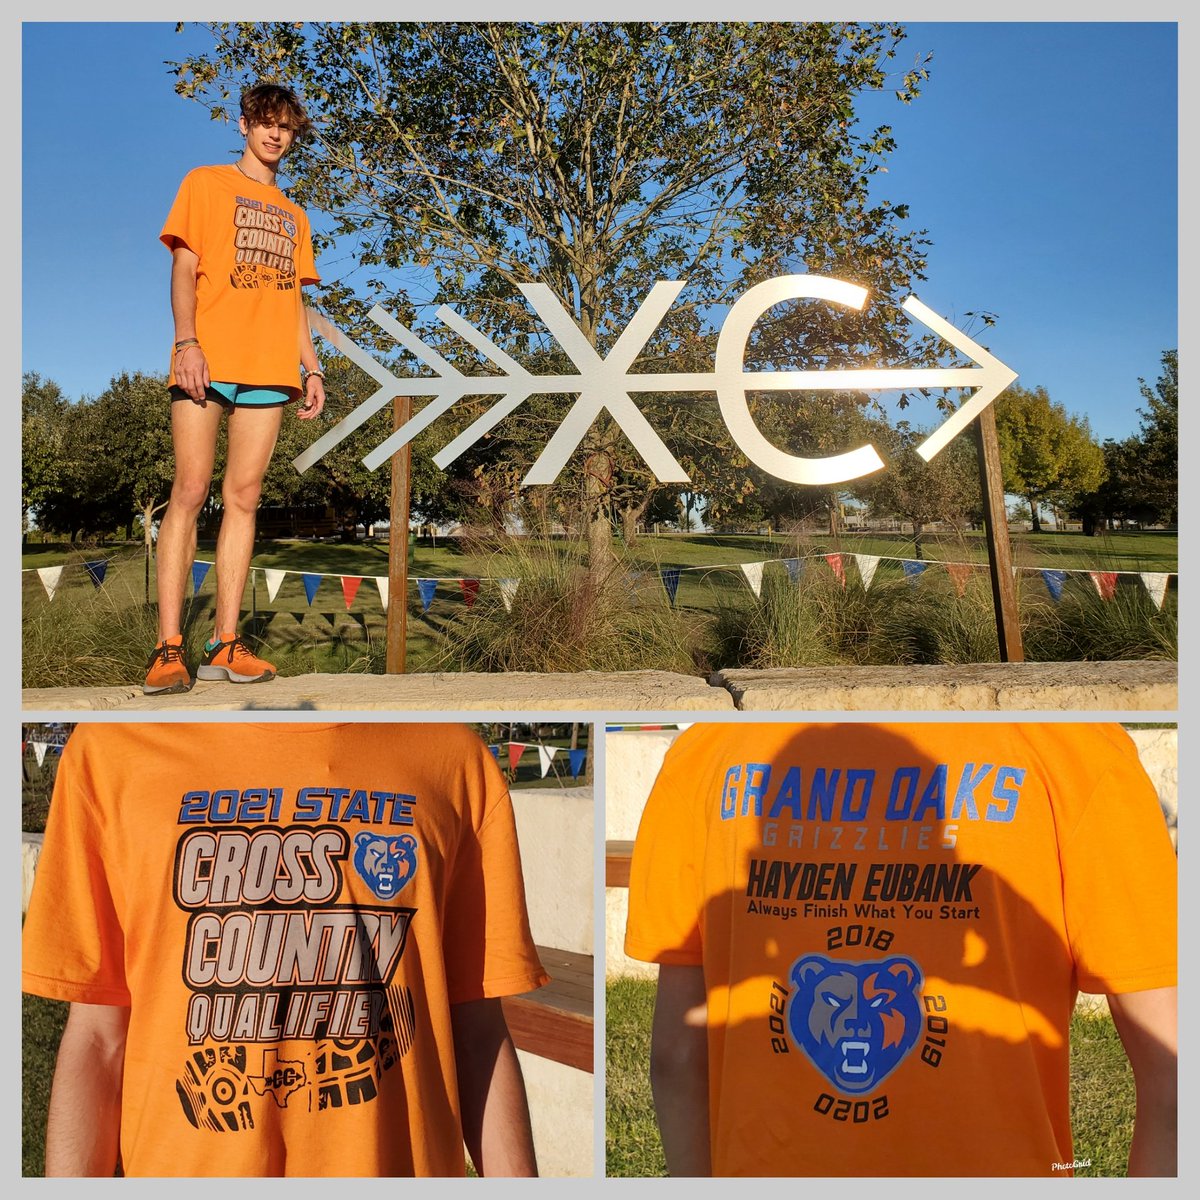 We made it! We survived the ride! Looking forward to Hayden's final ride at State! 4 years, #SaveBestForLast! Thx @NorthHoustonAth for the awesome shirts!✊ #FinalRide #UILState2021 #LastingLegacy @GrandOaksCISD @grandoaksath @ConroeSports